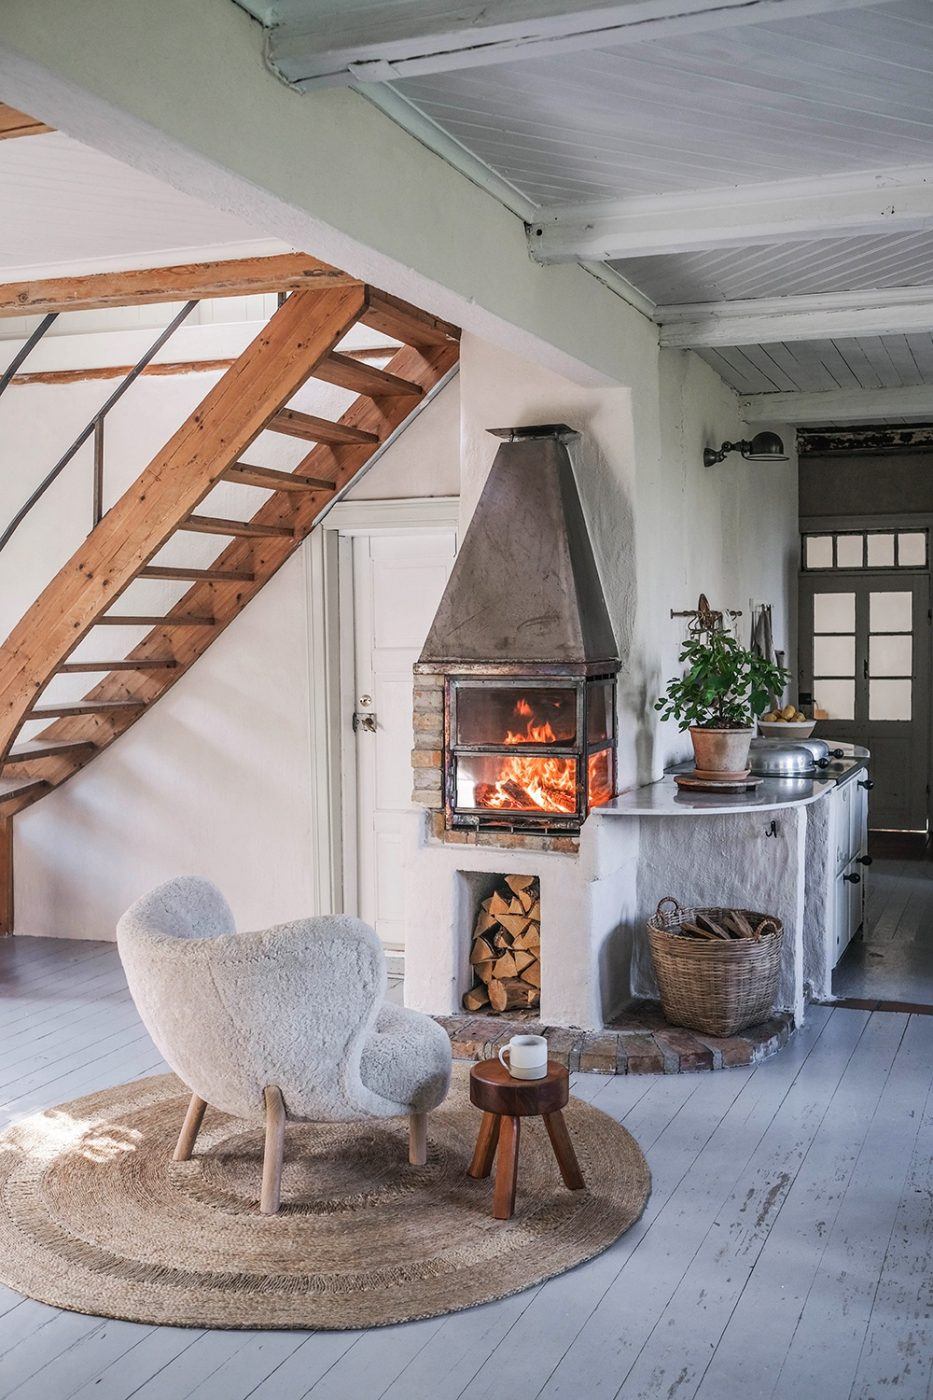 Image for Home Tour – Our Swedish Vacation House